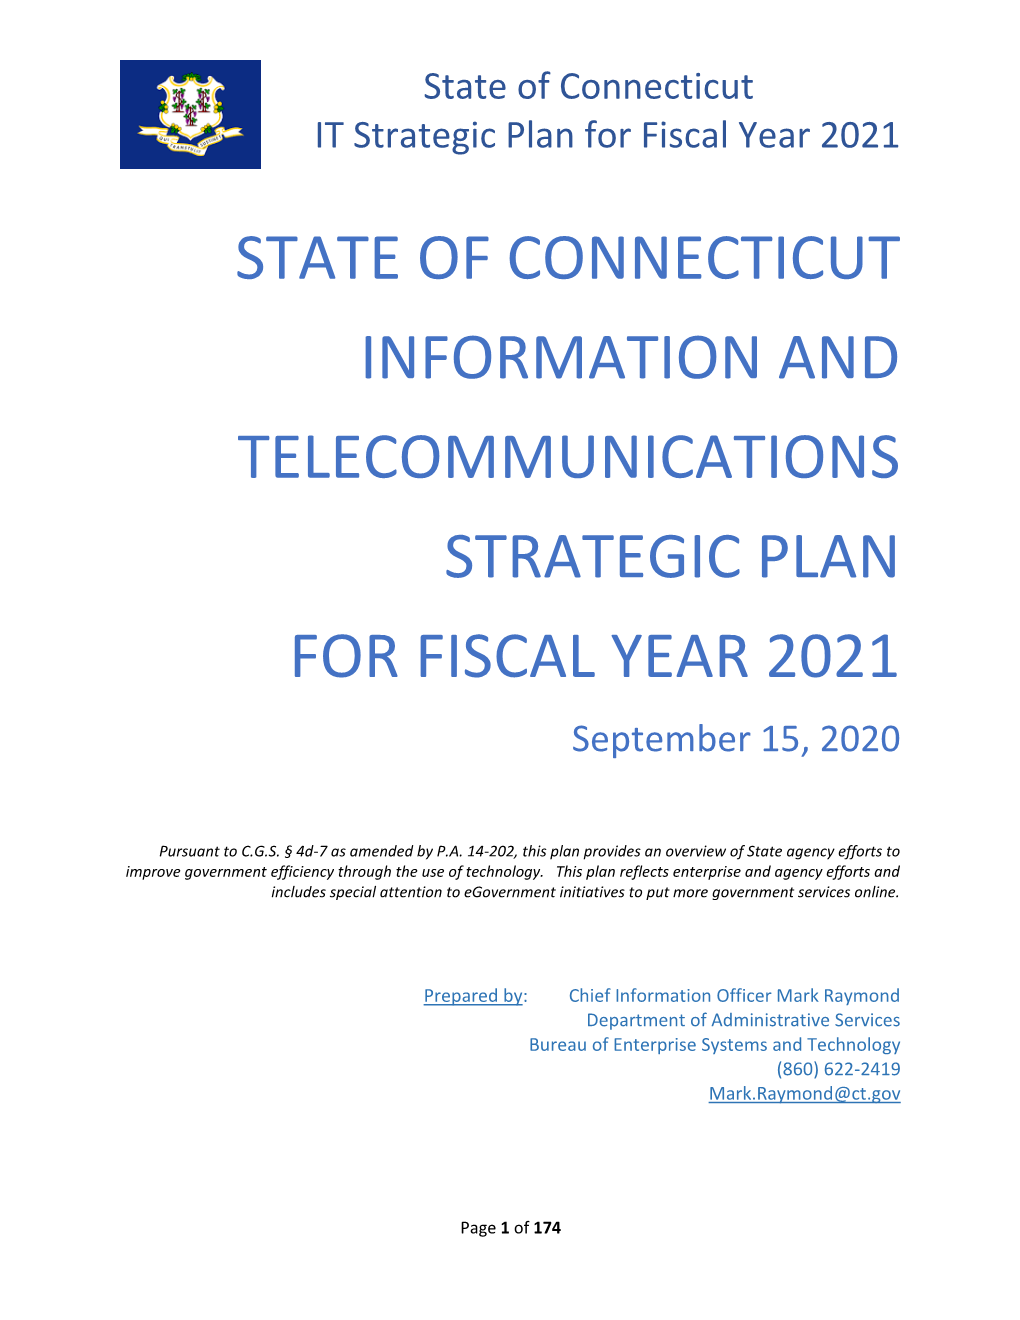 STATE of CONNECTICUT INFORMATION and TELECOMMUNICATIONS STRATEGIC PLAN for FISCAL YEAR 2021 September 15, 2020